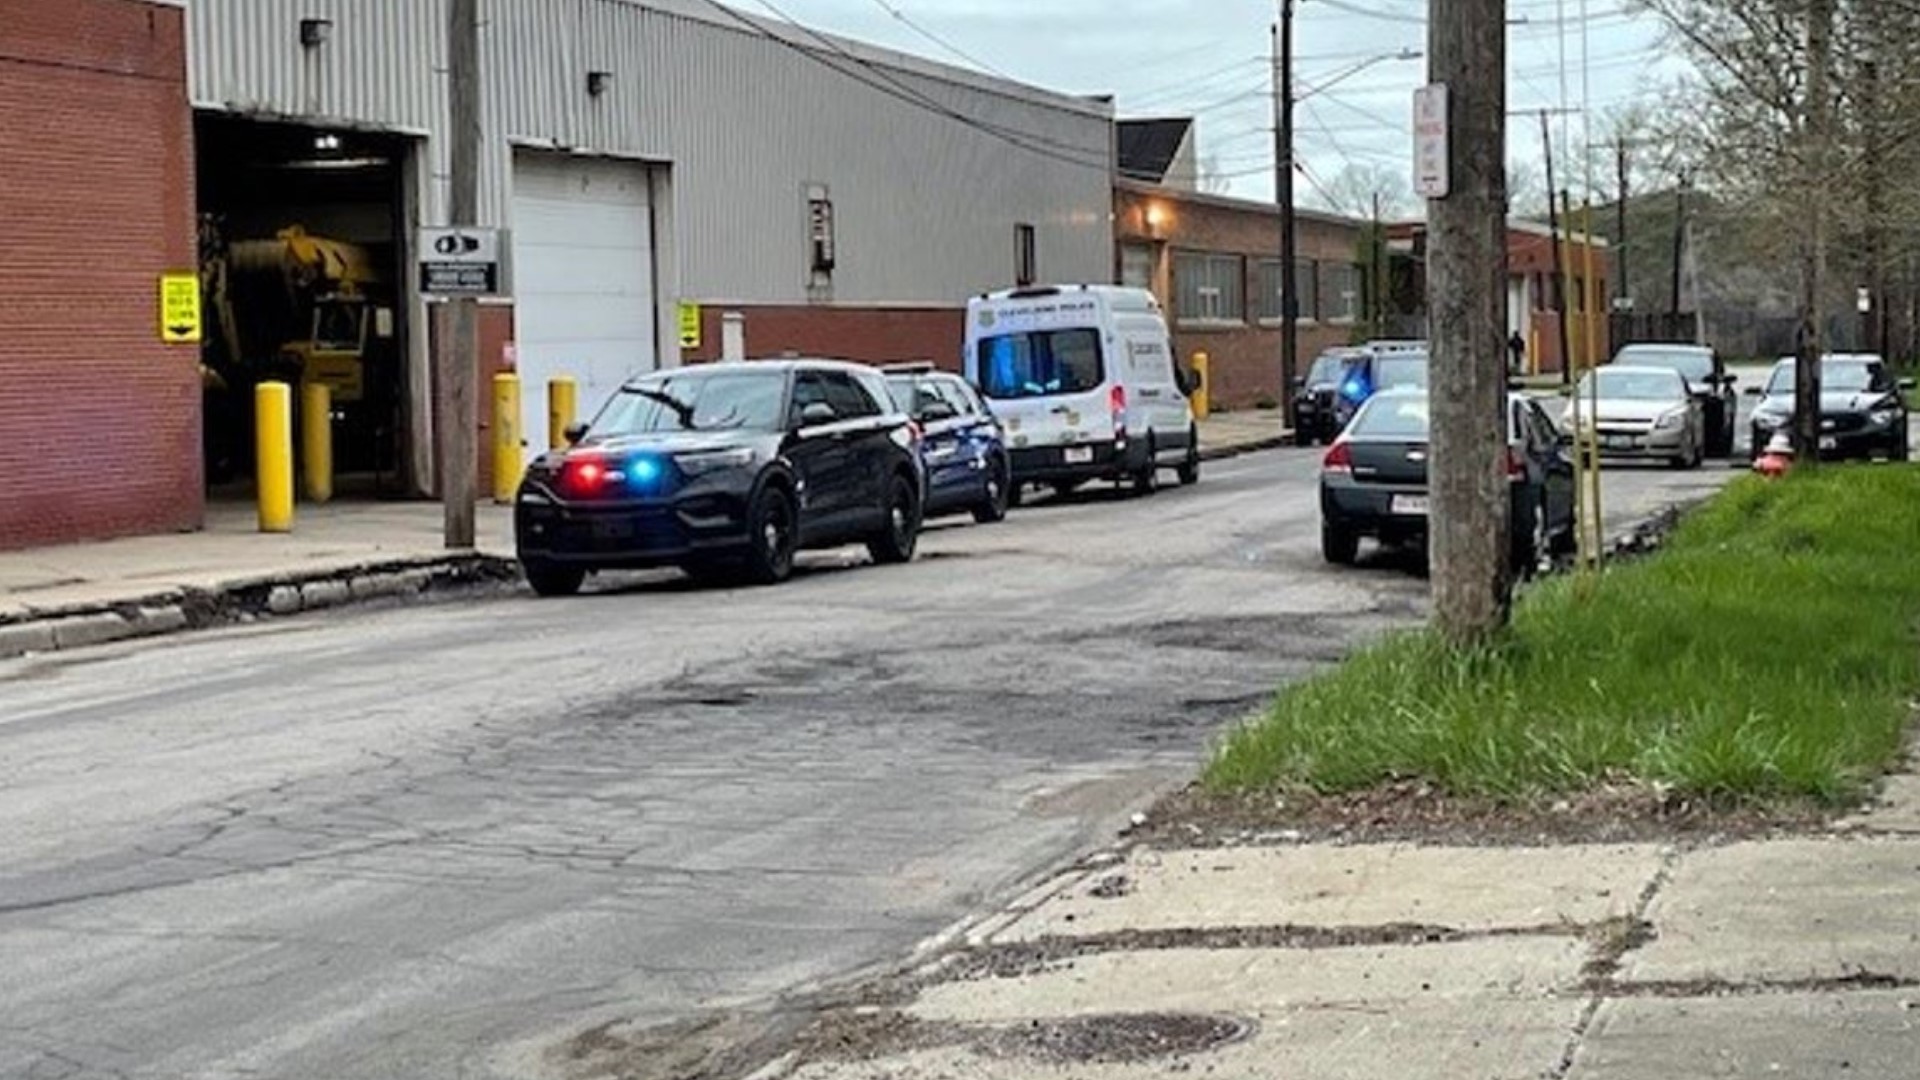 This is video from the scene where a Cleveland city employee was hurt in a shooting in the 2300 block of East 65th Street.